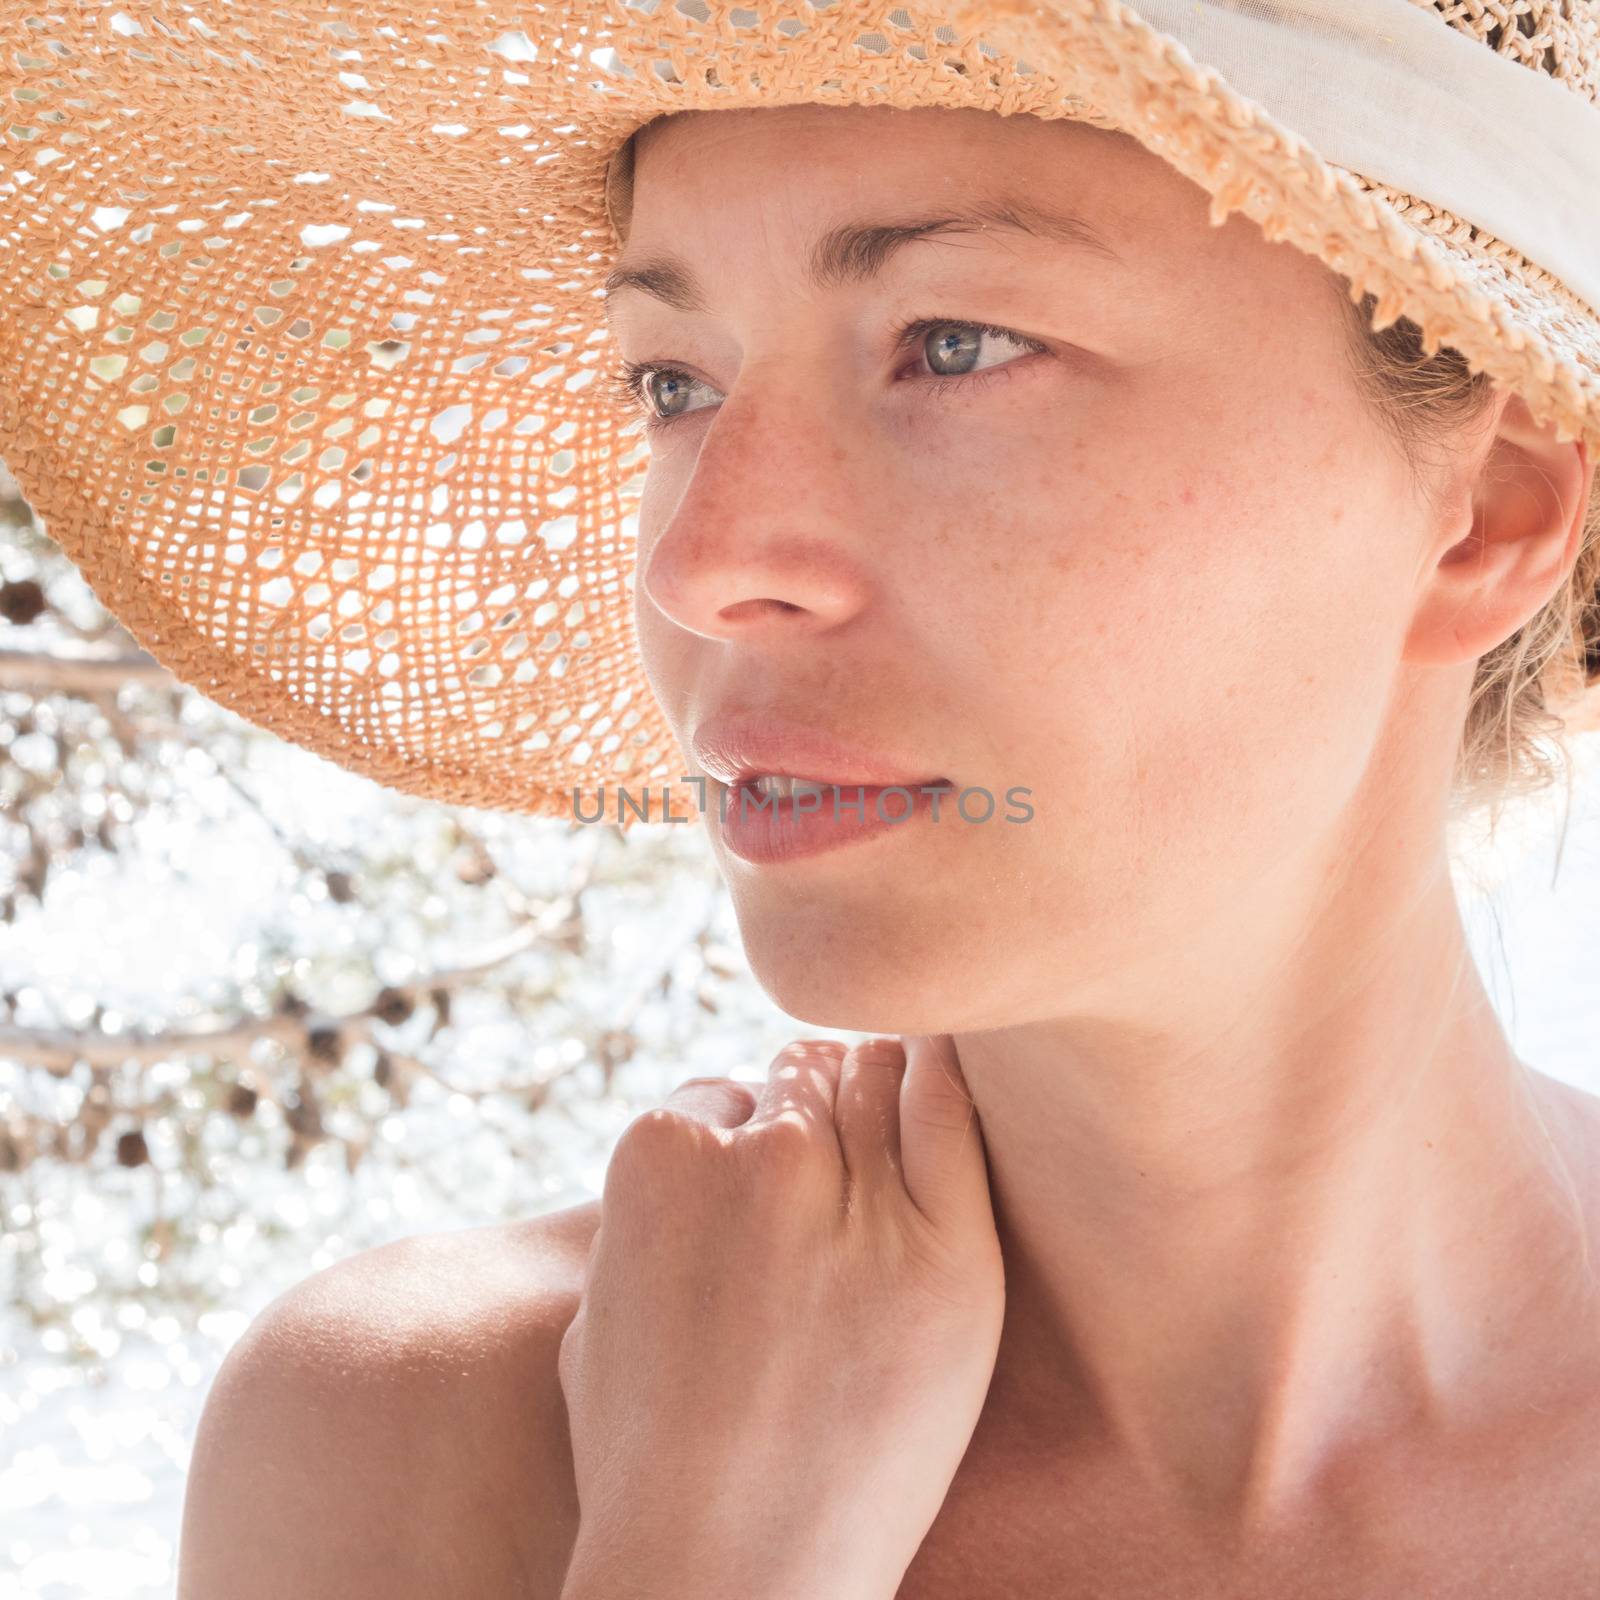 Close up portrait of no makeup natural beautiful sensual woman wearing straw sun hat on the beach in shade of a pine tree.